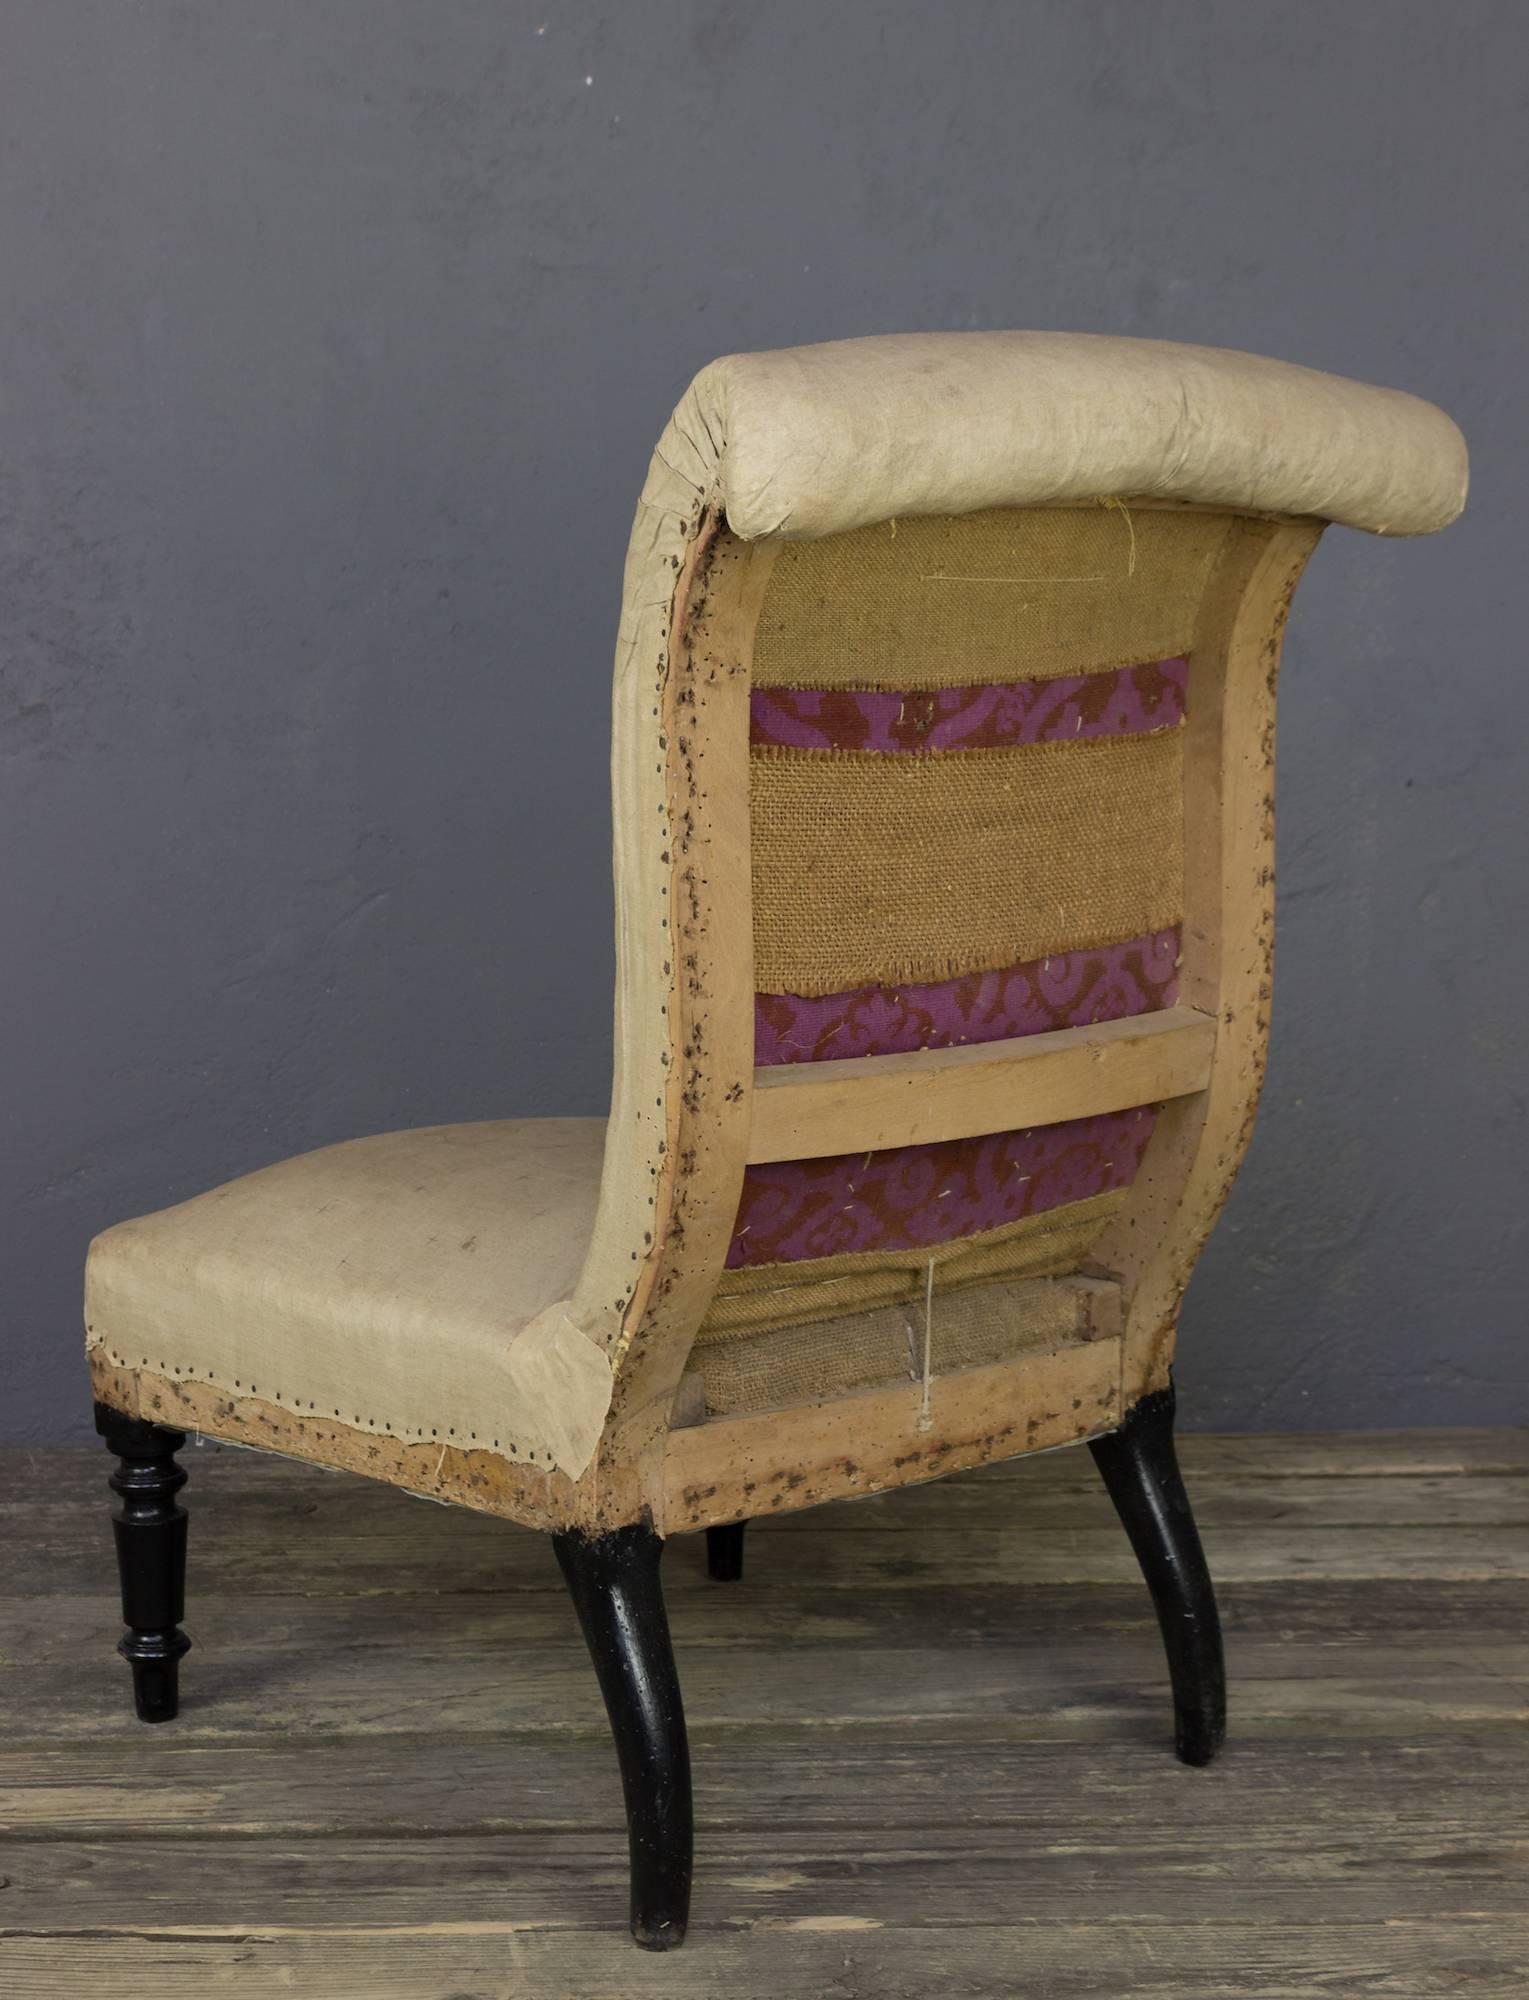 Elegant French slipper chair from the 19th century, the Napoleon III period. It has a rolled back with a tapered seat and back. Sold in aged muslin.